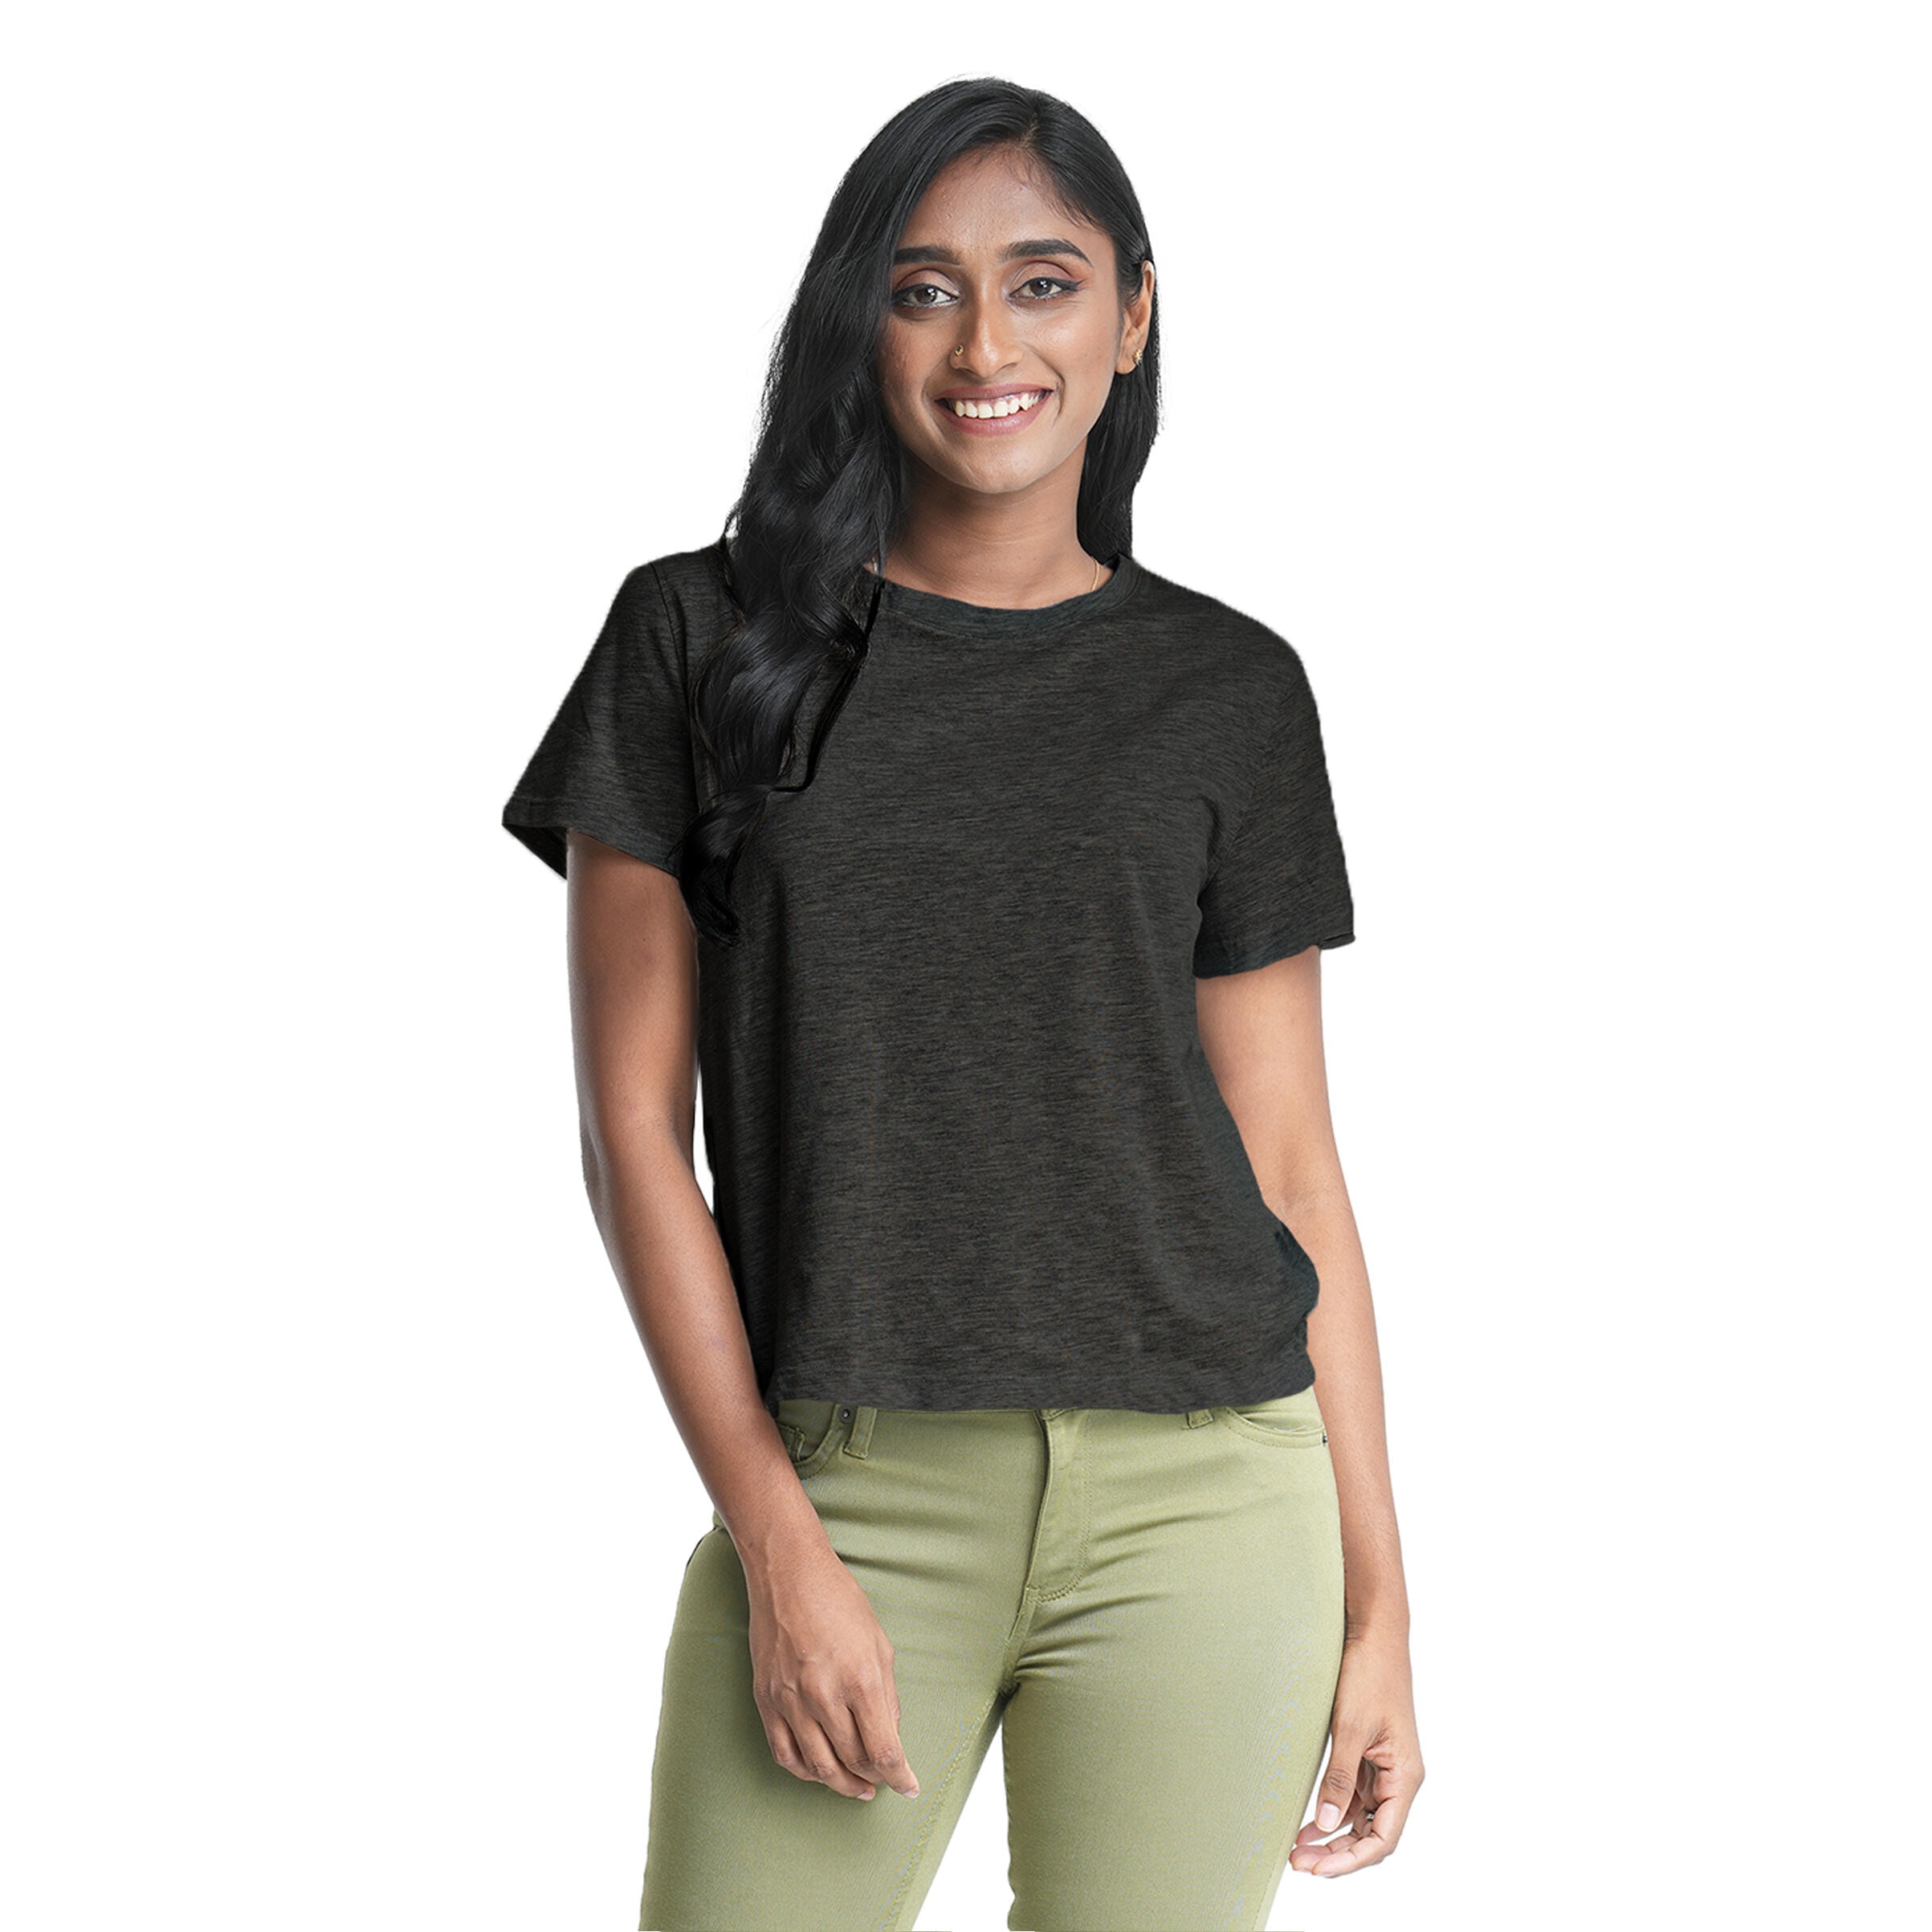 Women’s Crew Neck T-Shirt – Charcoal Heather – Moose Clothing Company